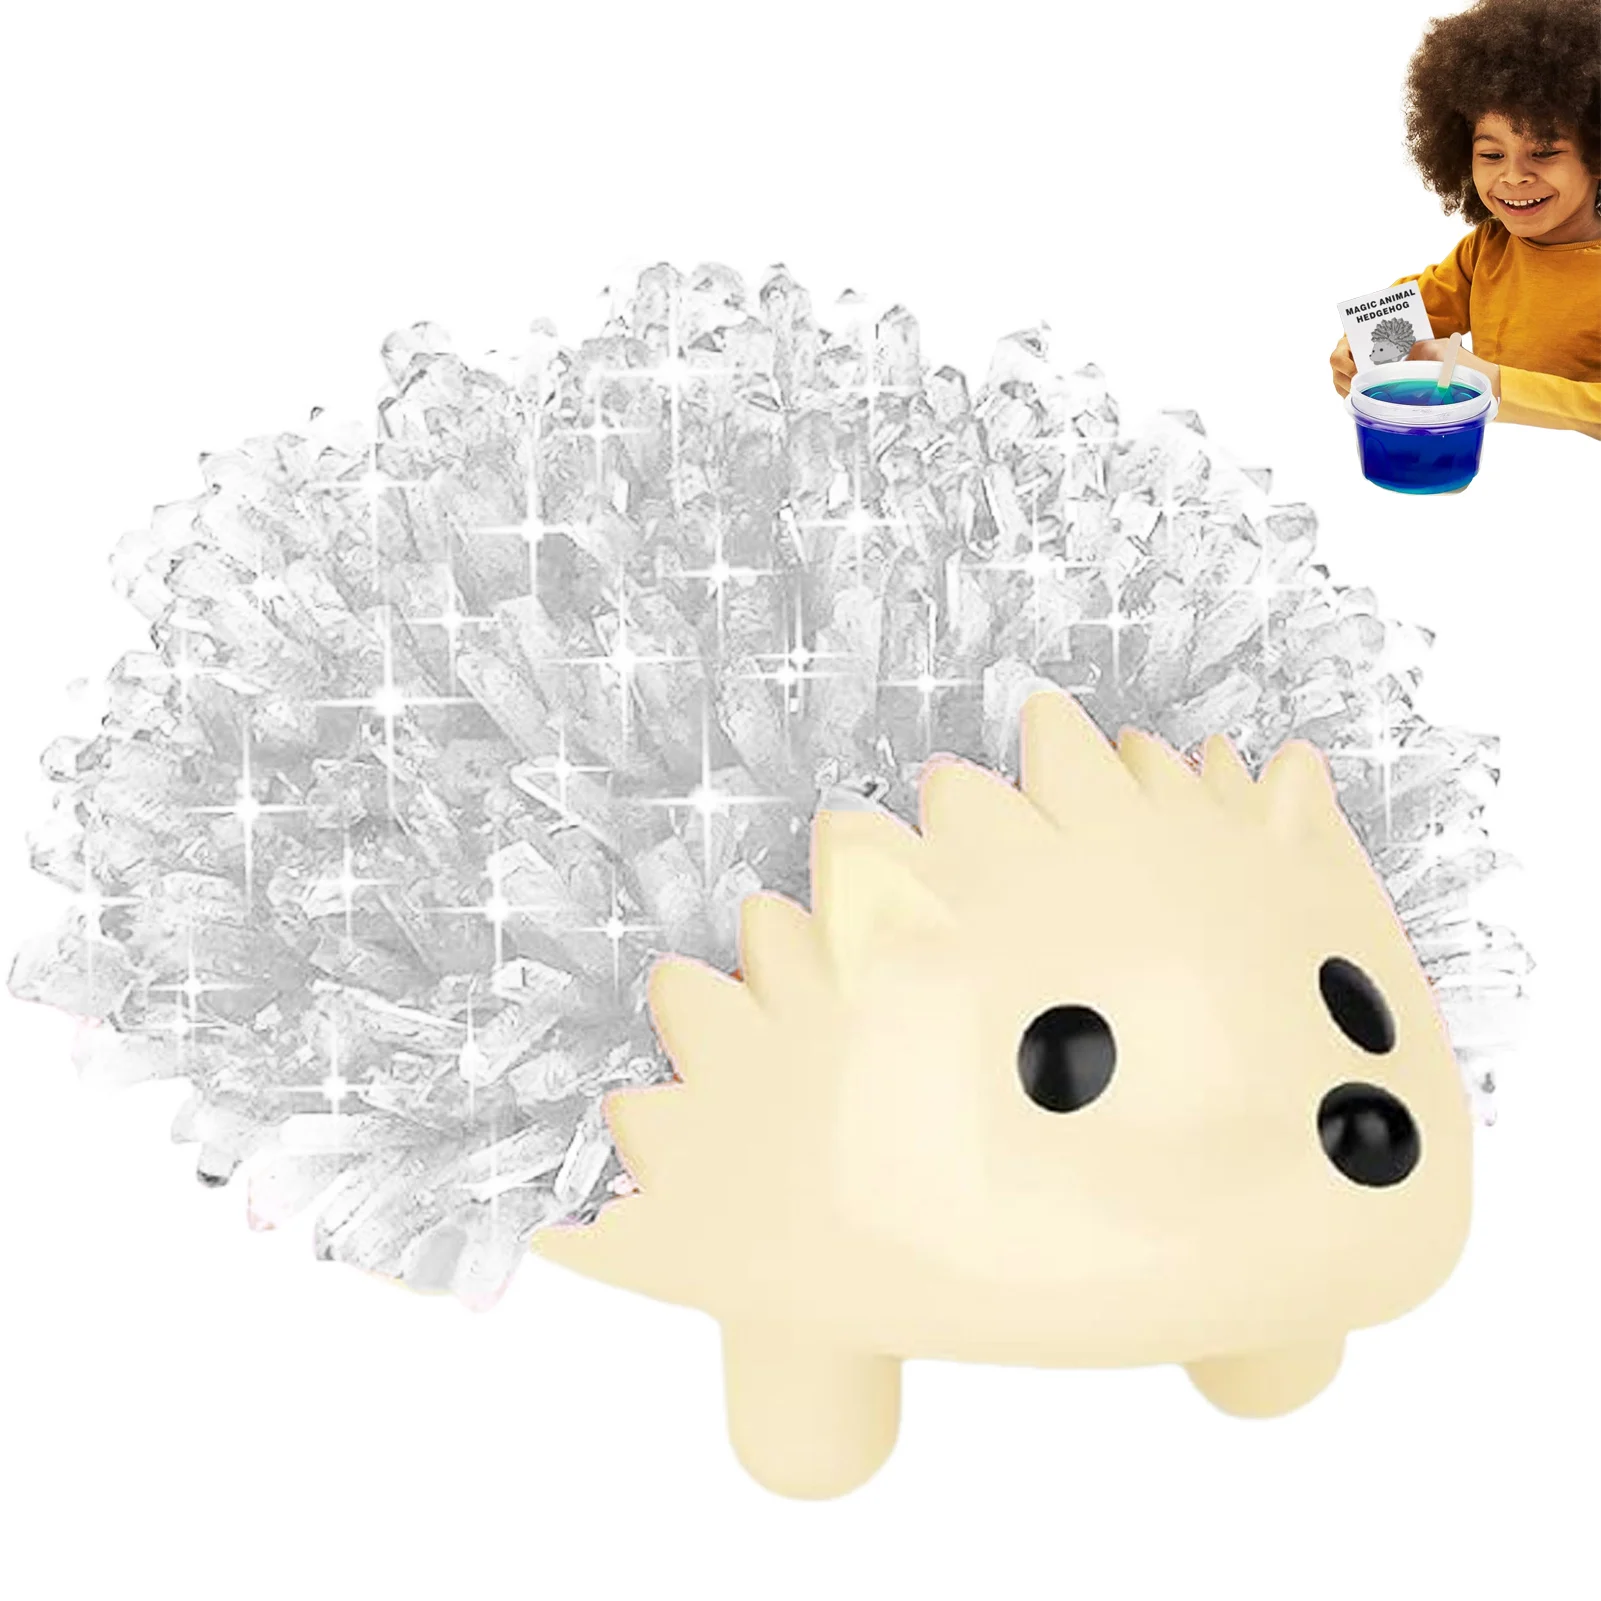 

Crystal Growing Hedgehog Kit Convenient to Use Safe Material Science Experiments Suitable for Teens STEM Gifts